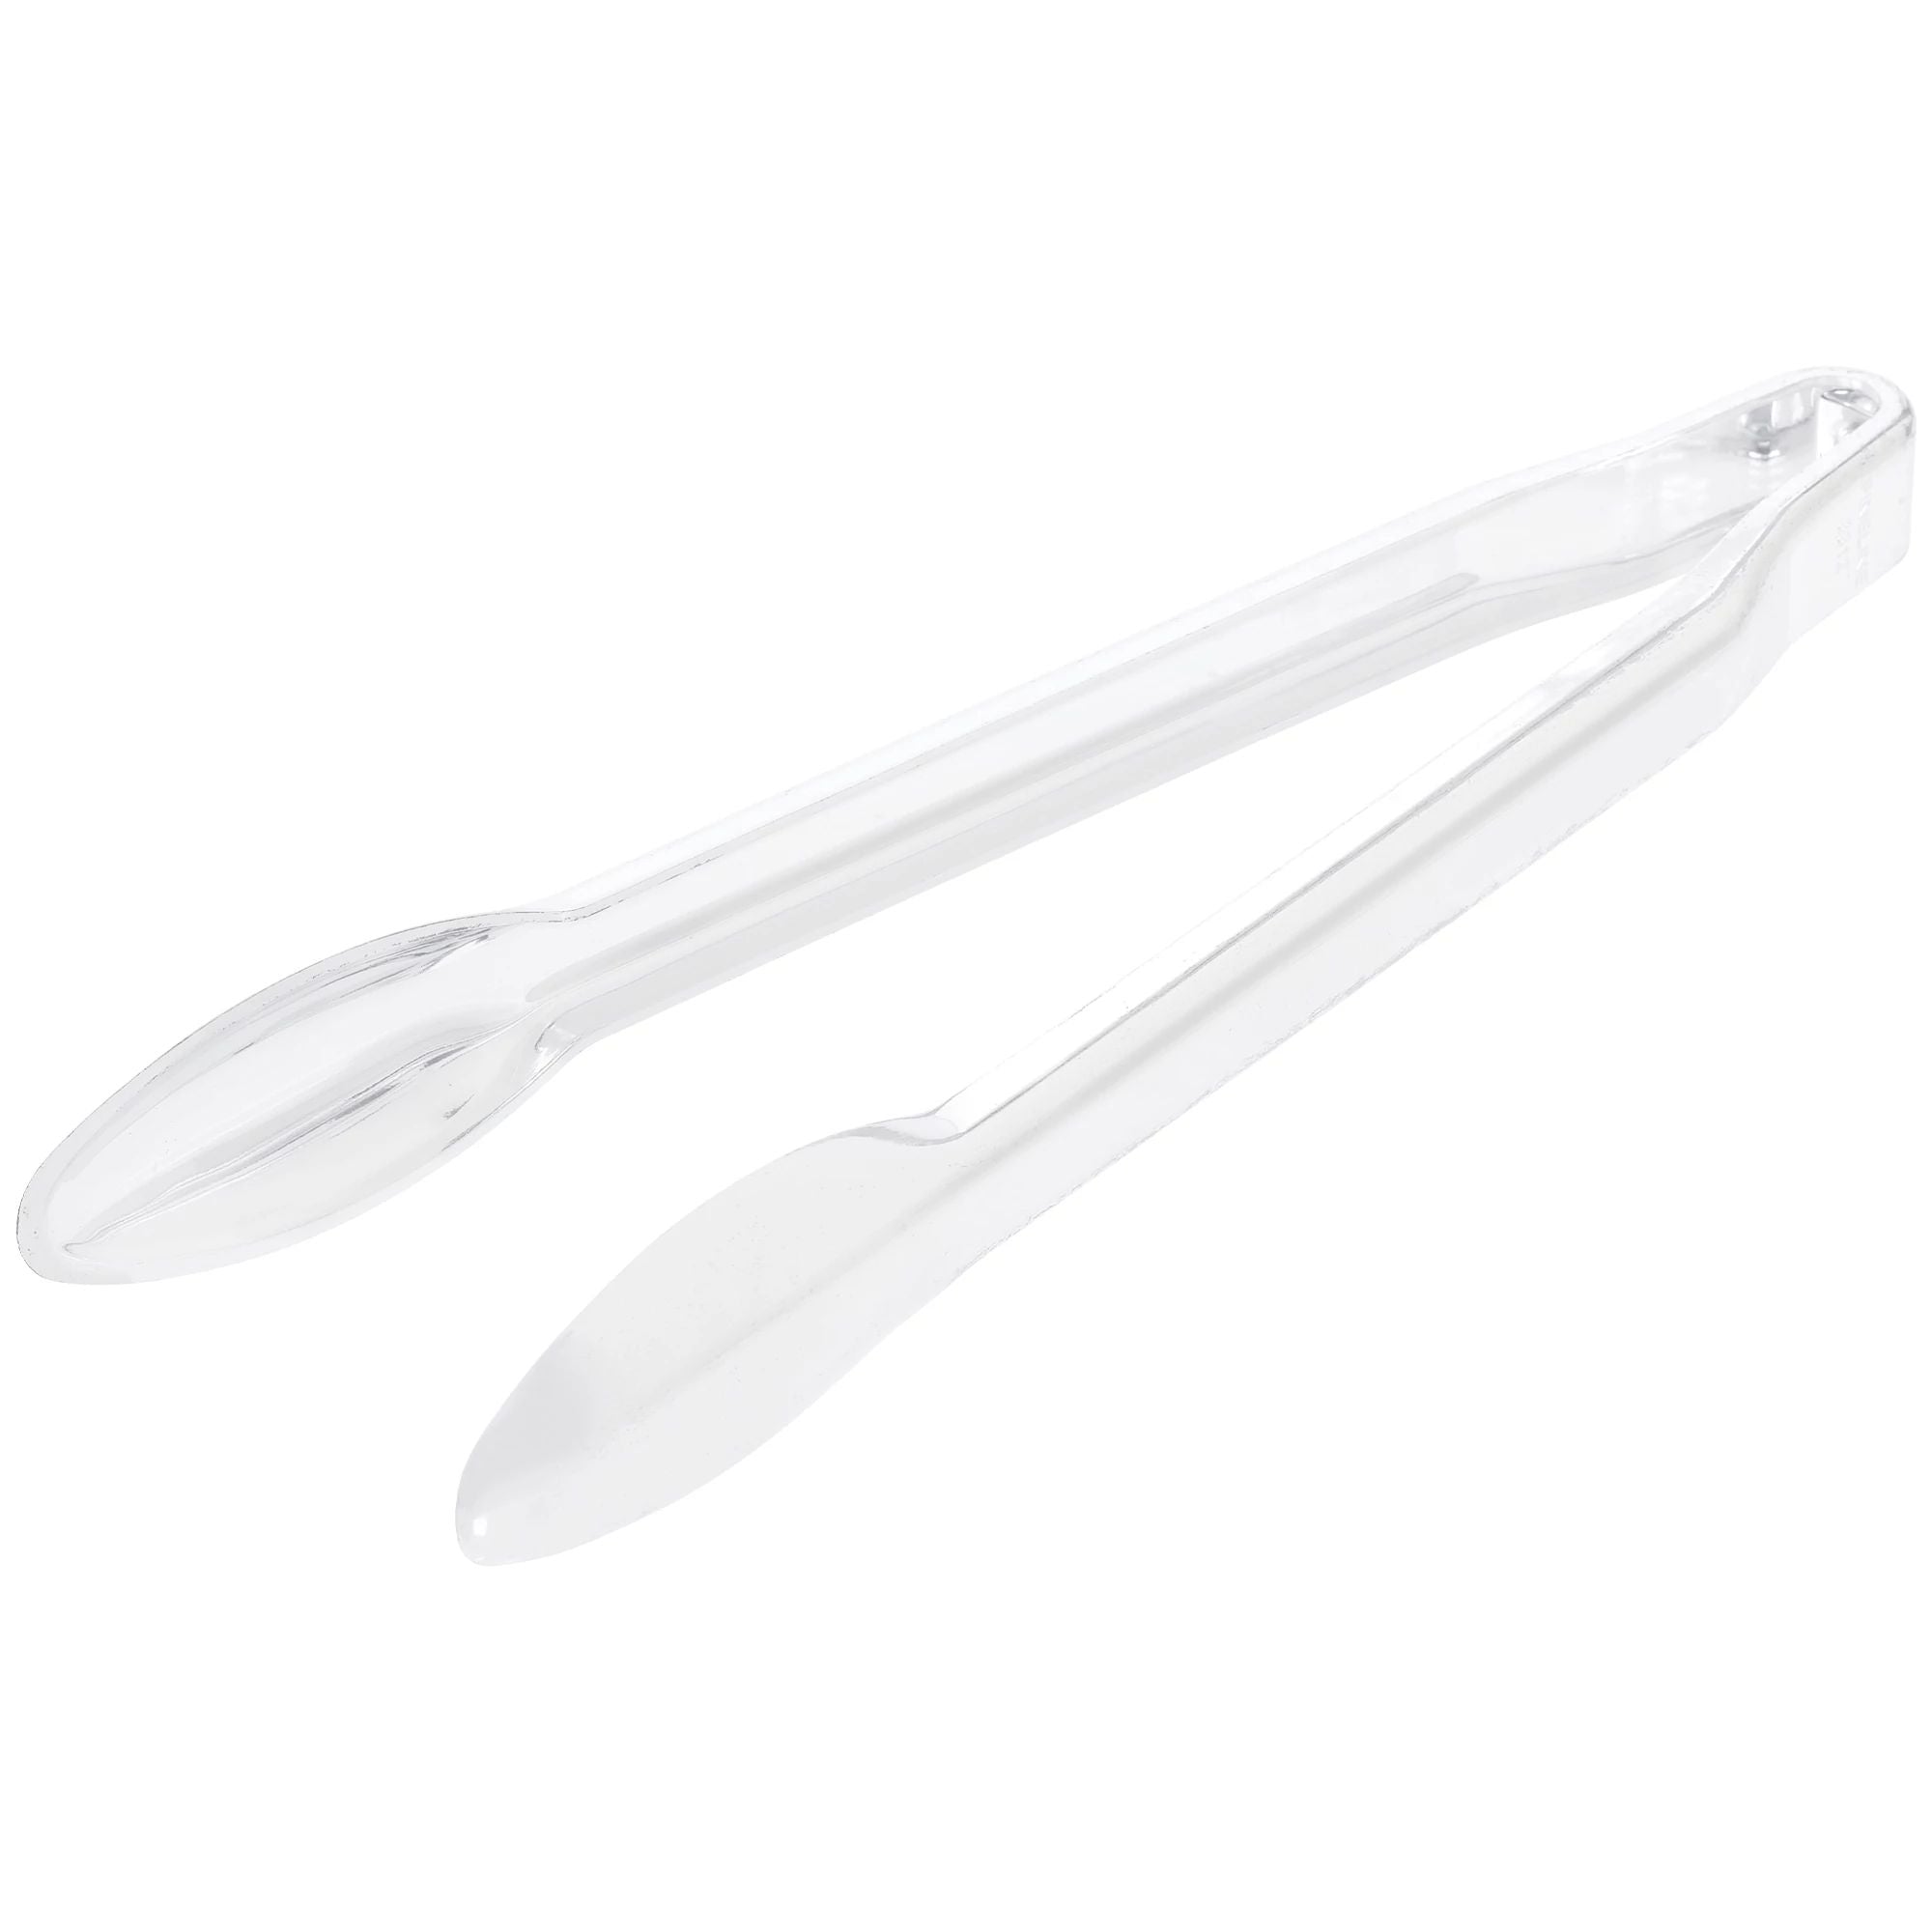 Frosty White PET Plastic Tongs, 1 Count